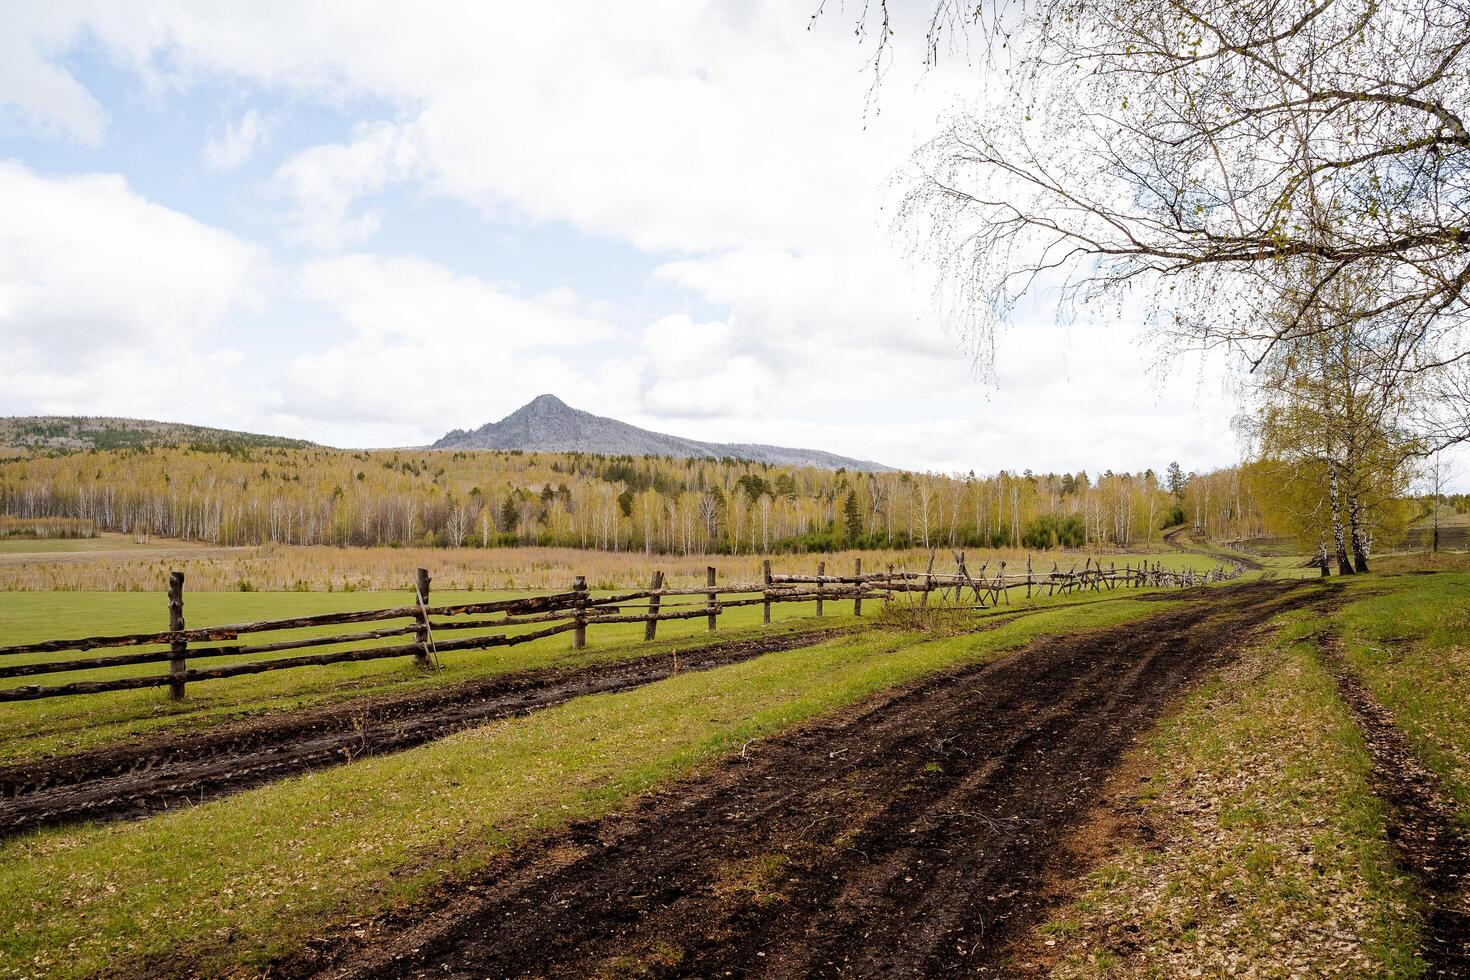 Countryside mountainous landscape, autumn season, dry leaves lie on the ground, black road stretches upwards, fenced pasture, wooden ranch fence photo